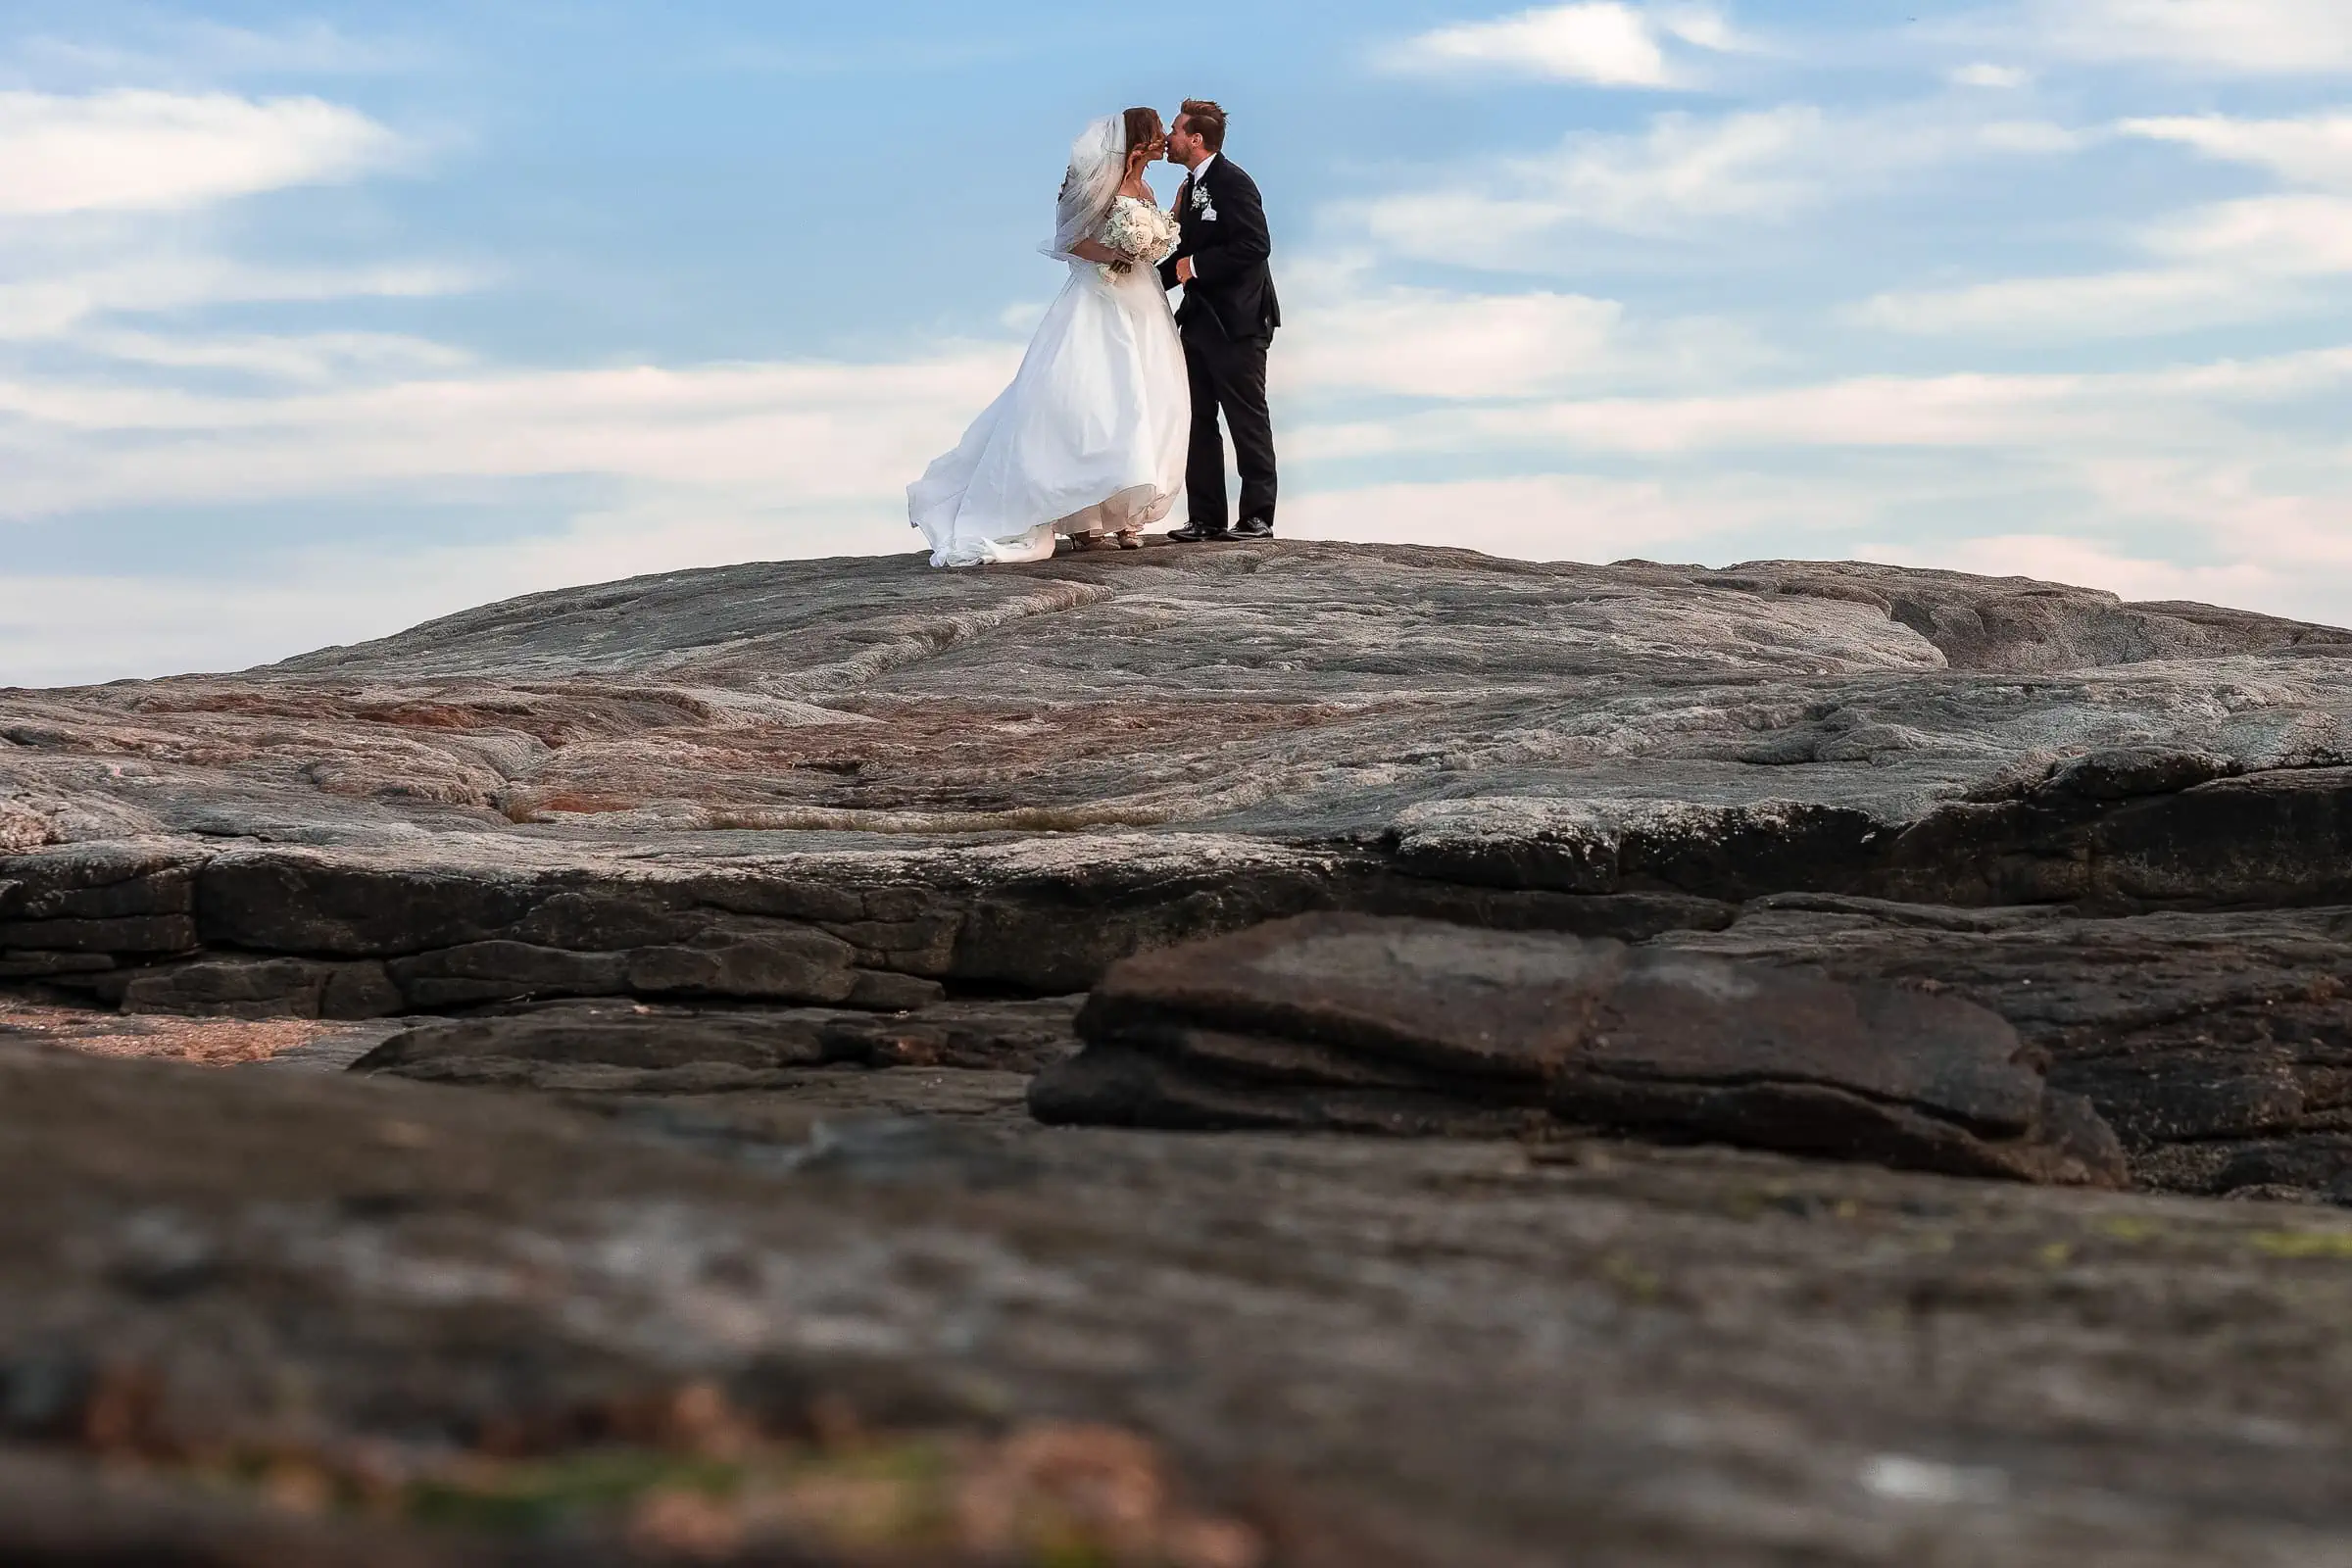 A bride and groom kissing atop a large rock